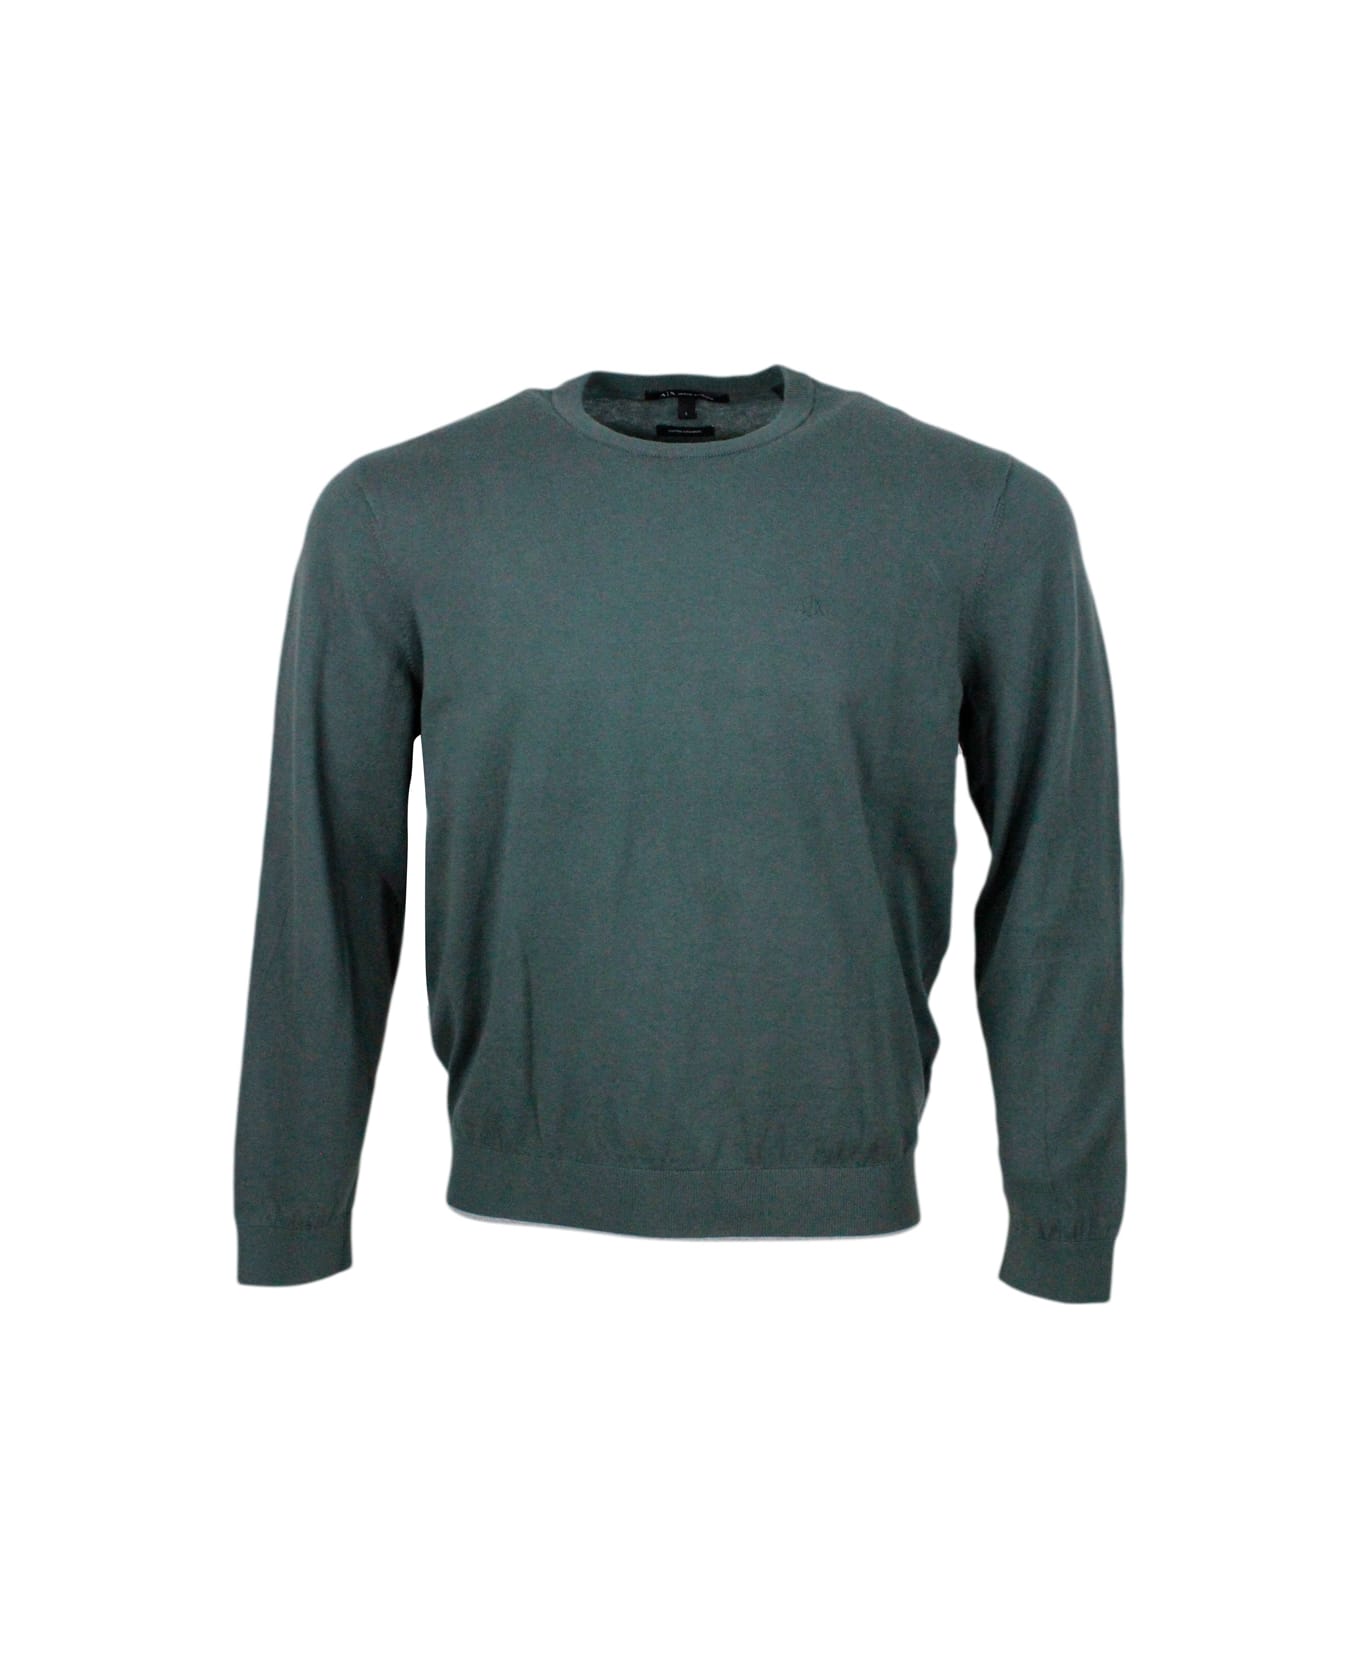 Armani Collezioni Lightweight Long-sleeved Crew-neck Sweater Made Of Warm Cotton And Cashmere With Contrasting Color Profiles At The Bottom And On The Cuffs - Verde urban chic